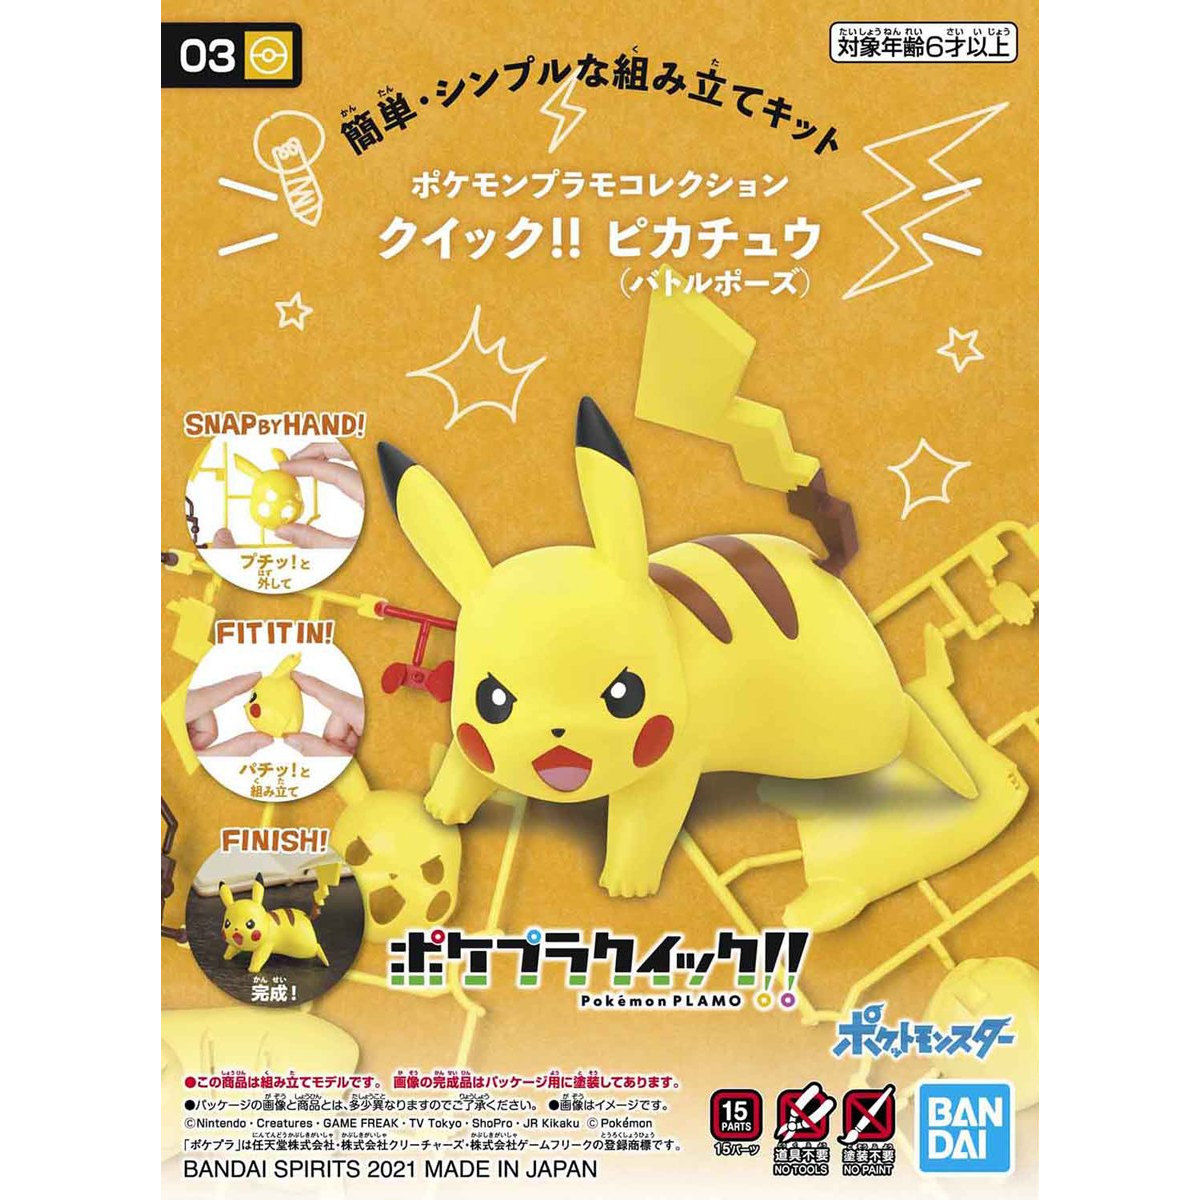 Pokémon - Pikachu (Battle) - Pokémon Model Kit Quick!! Collection No. 03 (Bandai), Easy assembly with 15 parts, touch gate system, foil sticker included, Nippon Figures